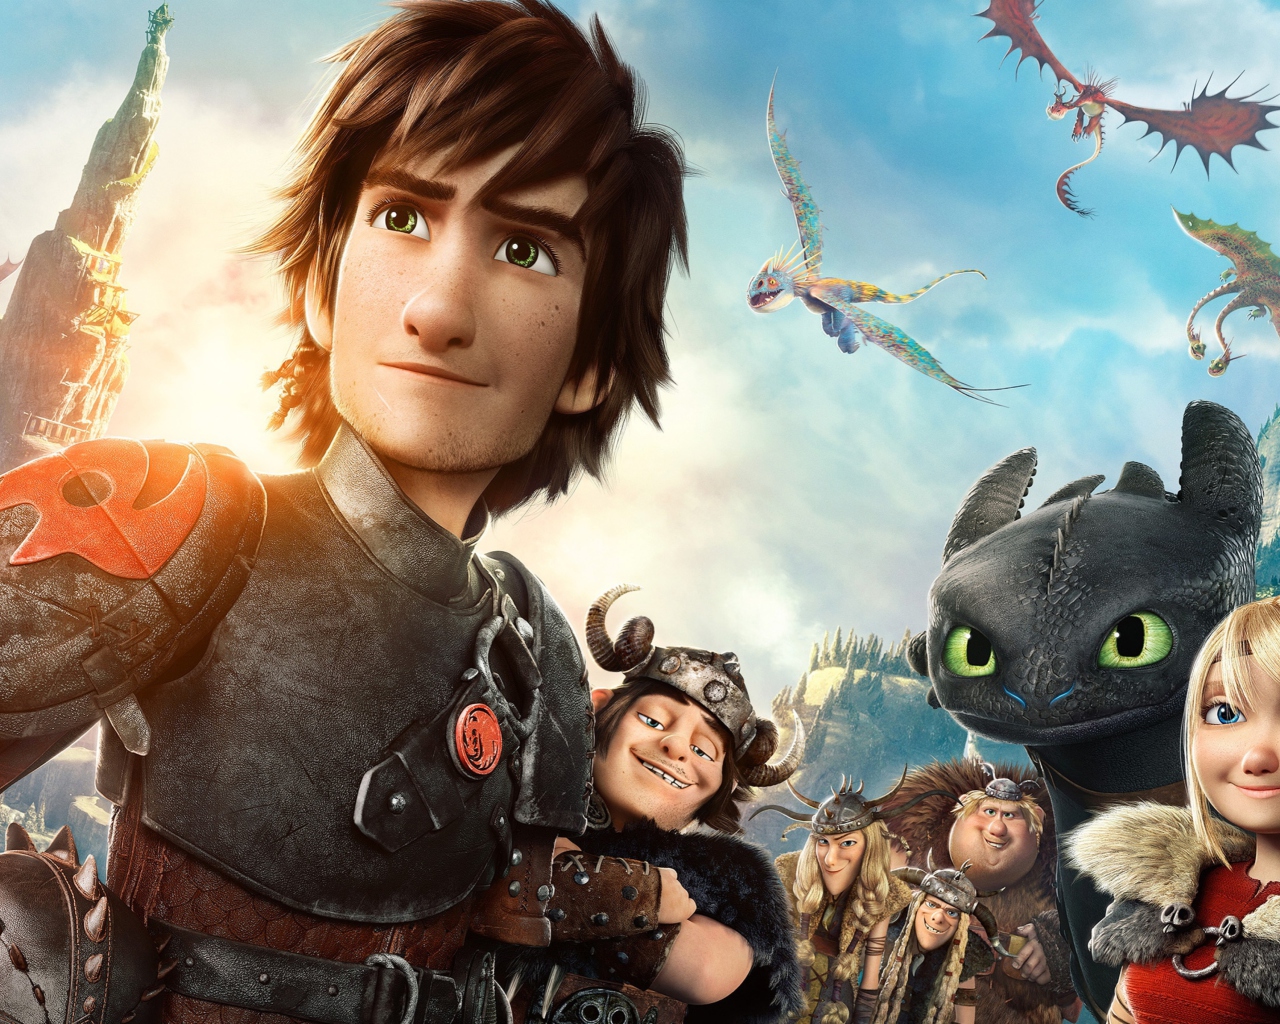 How To Train Your Dragon 2 wallpaper 1280x1024